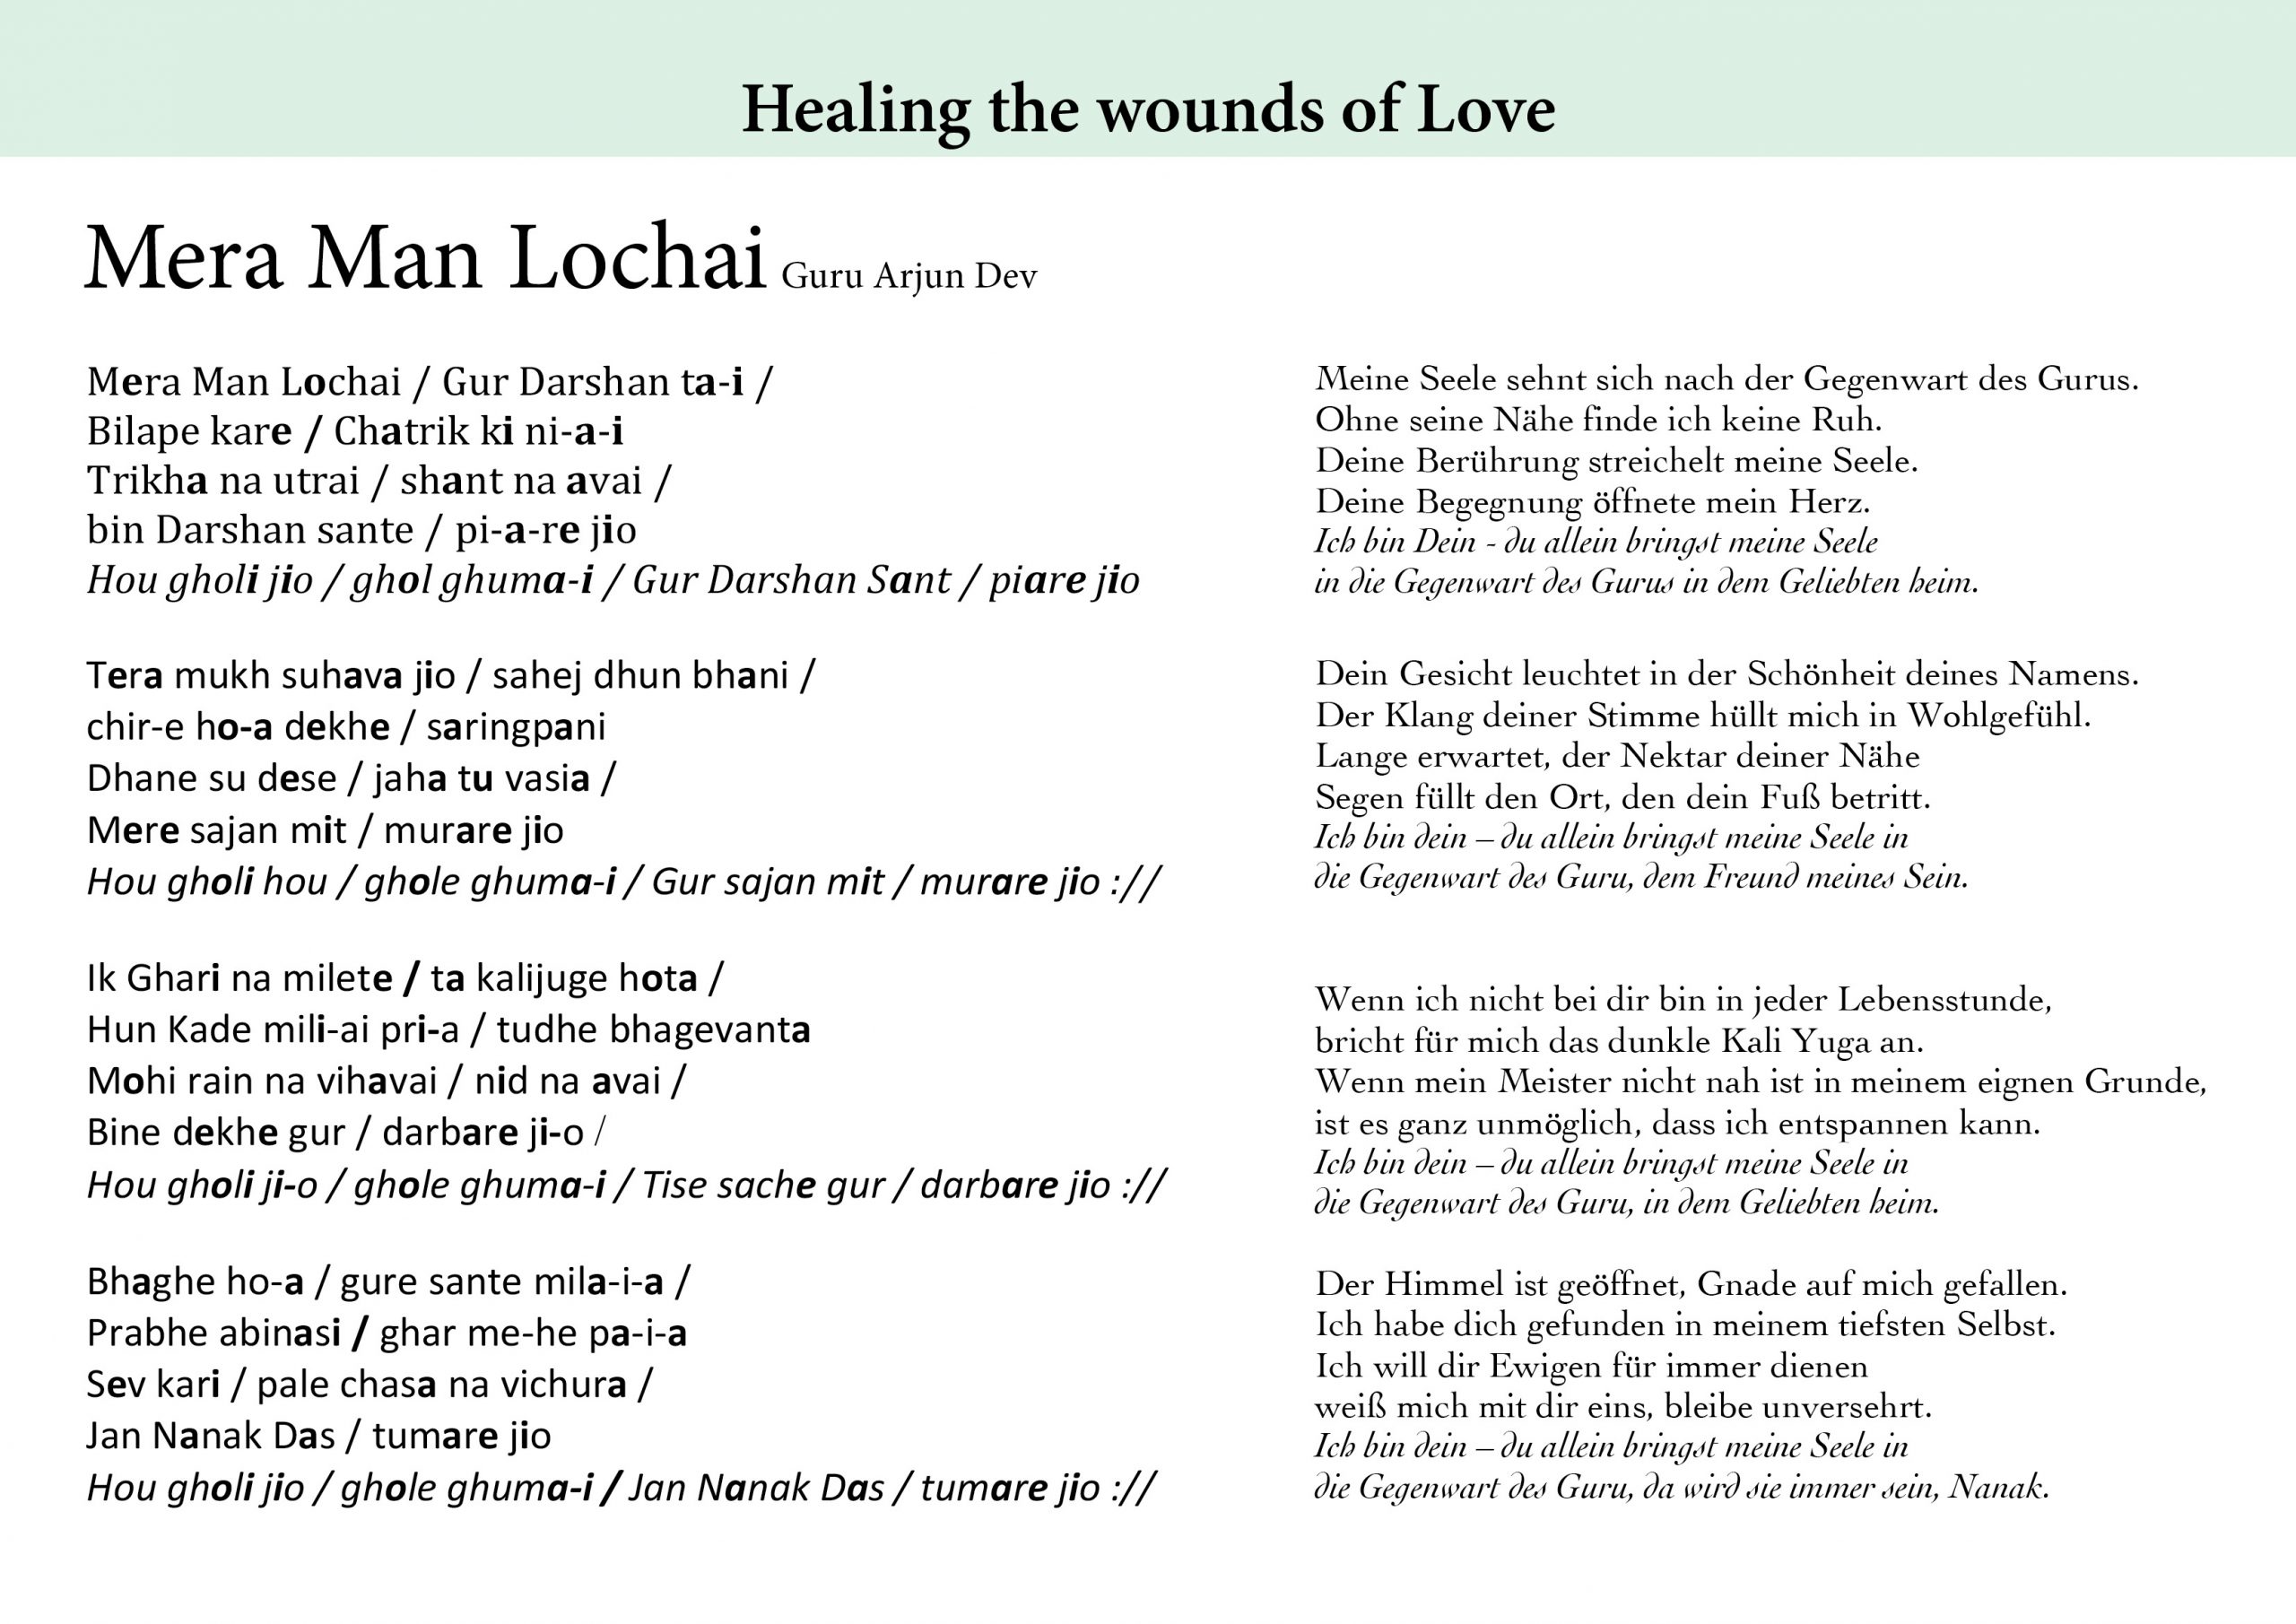 Healing th wounds of Love